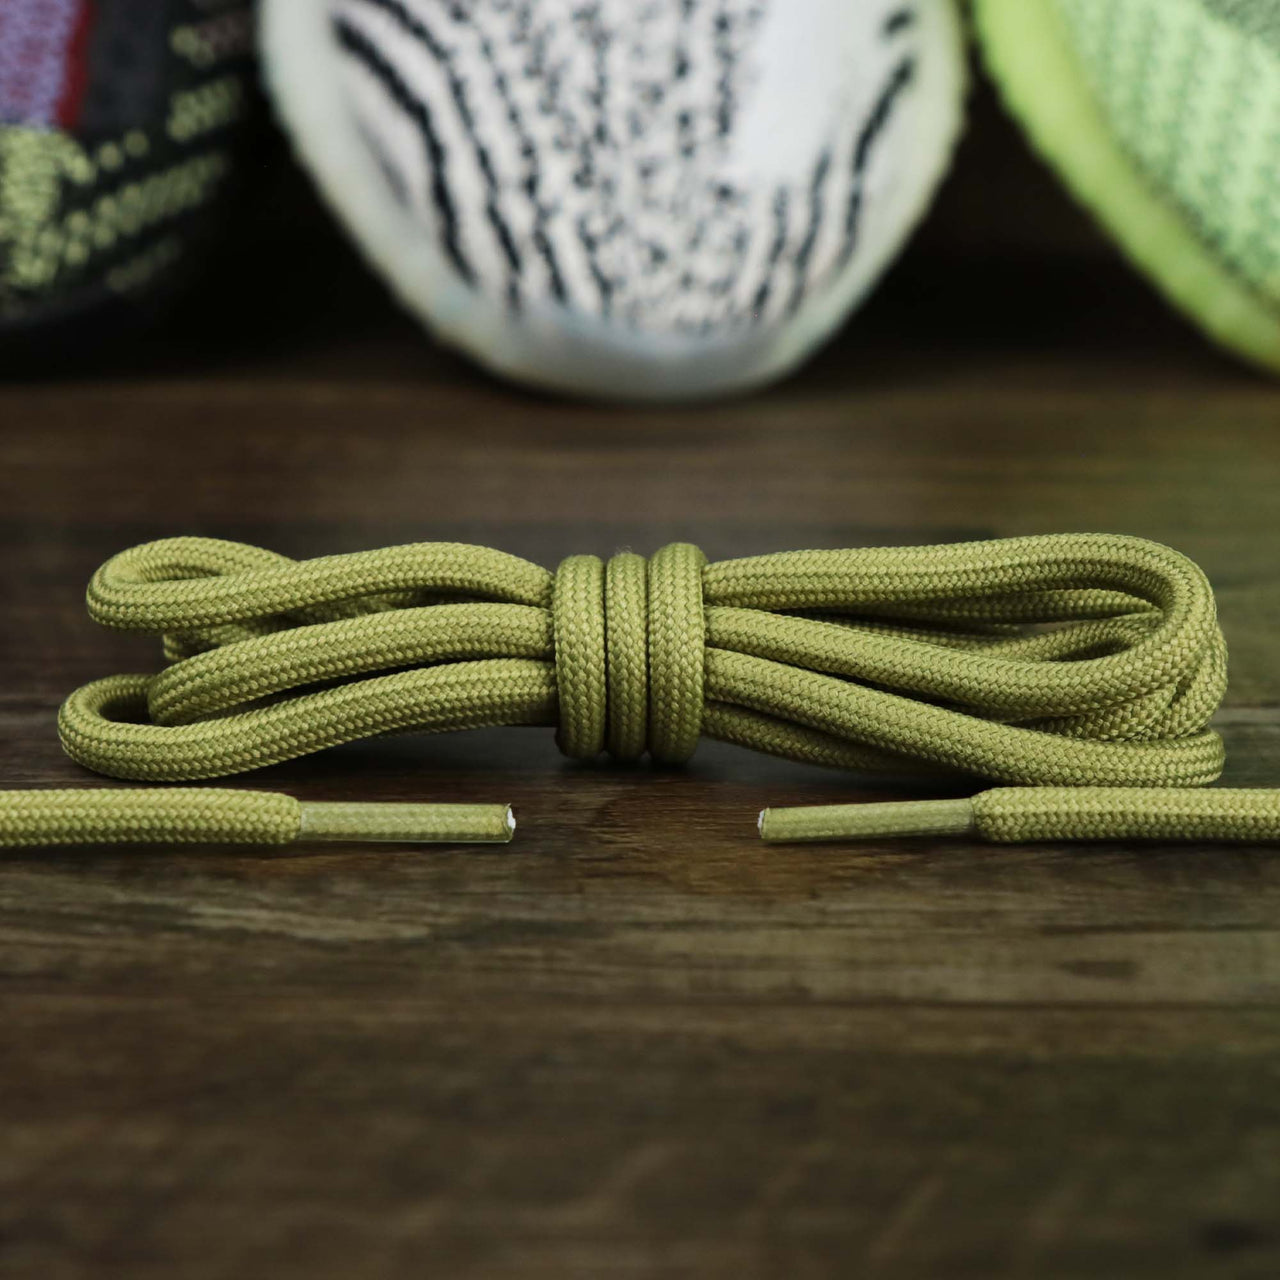 The Solid Rope Light Green Shoelaces with Light Green Aglets | 120cm Capswag folded up